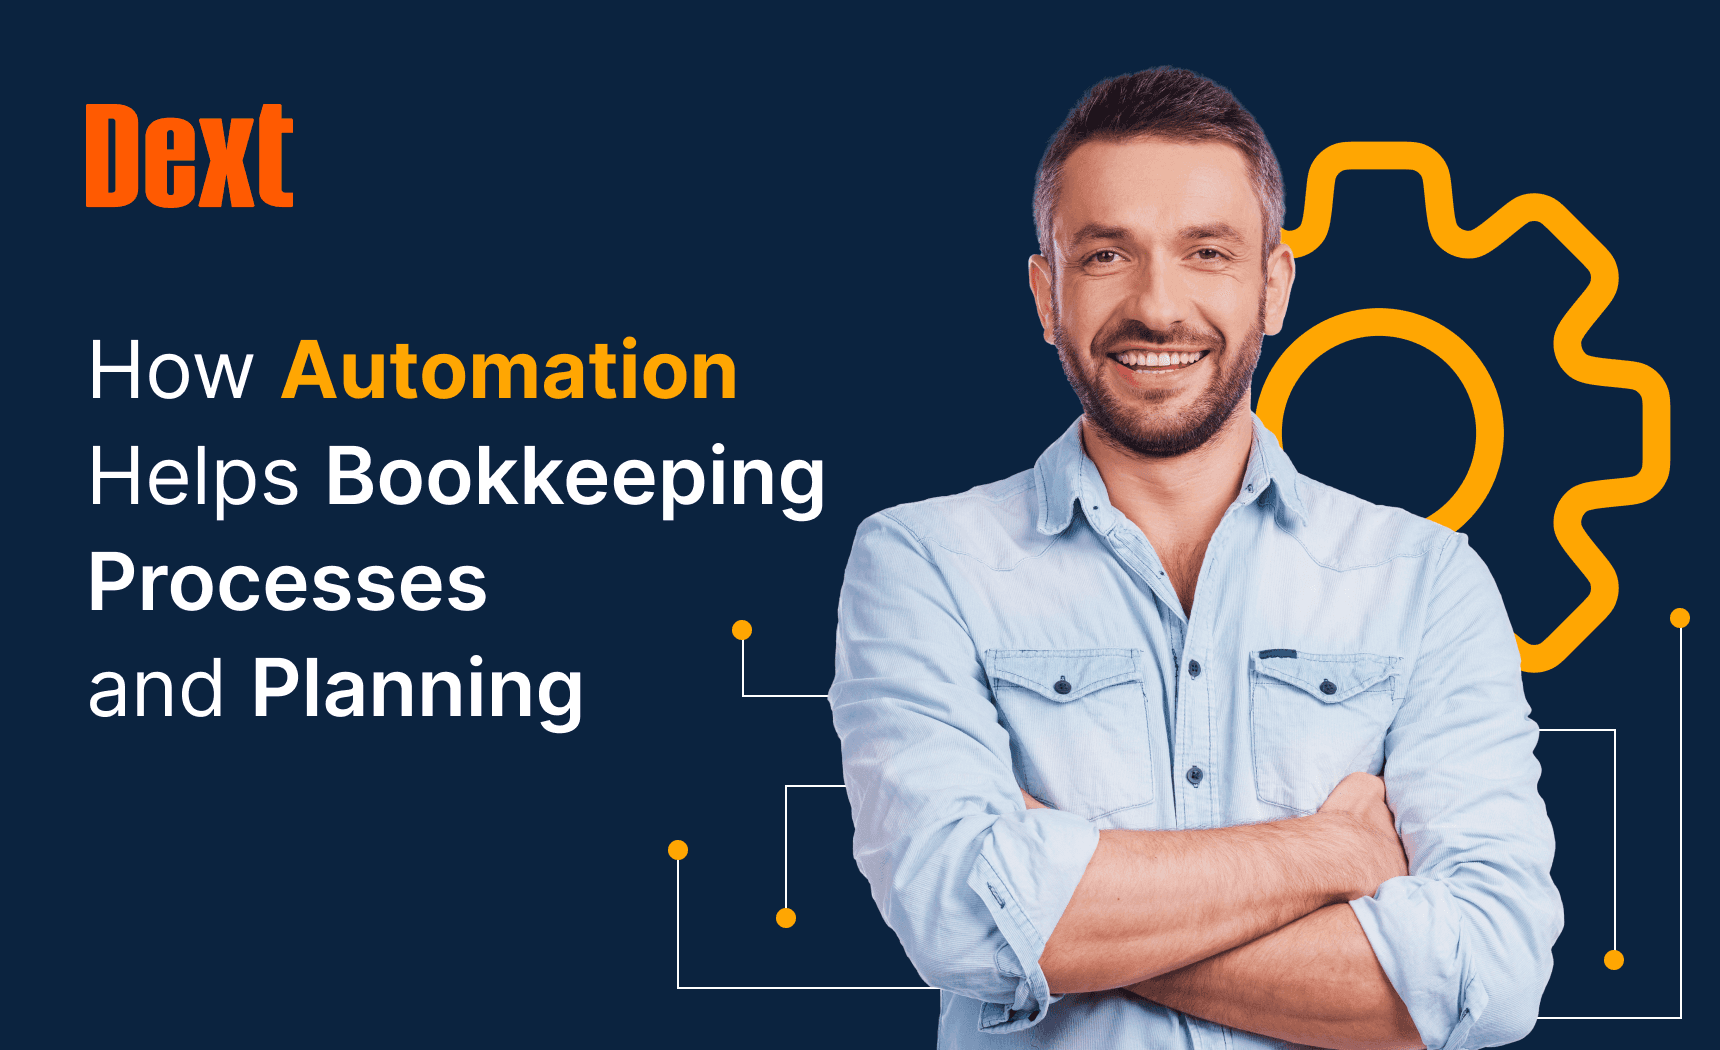 How Automation Helps Bookkeeping Processes and Planning